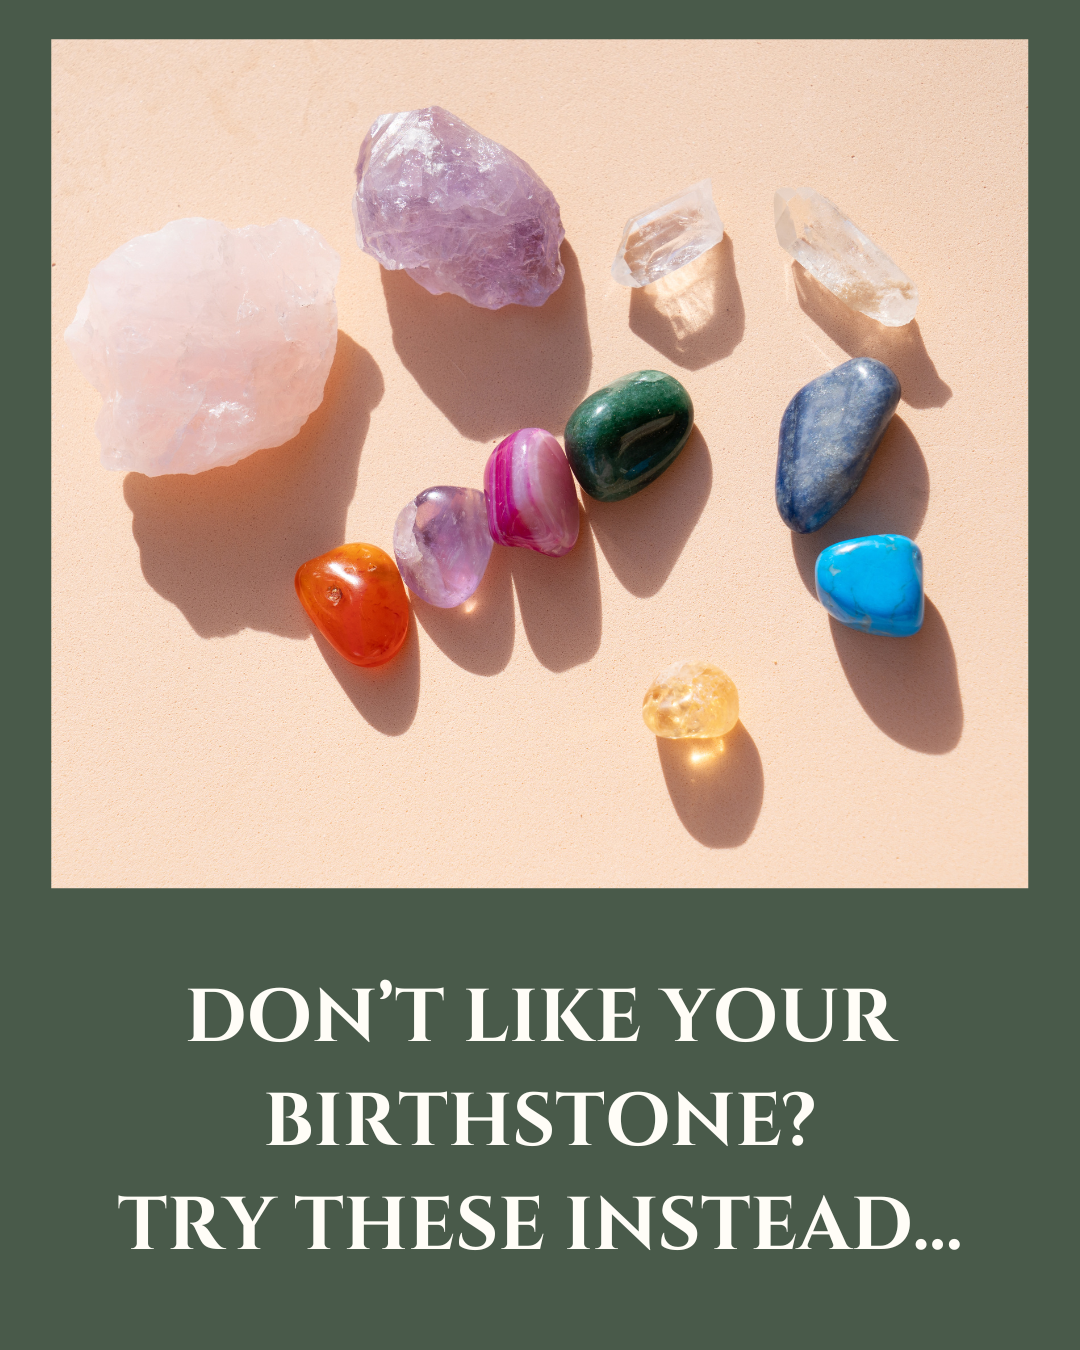 Don't like your birthstone? Try these instead...